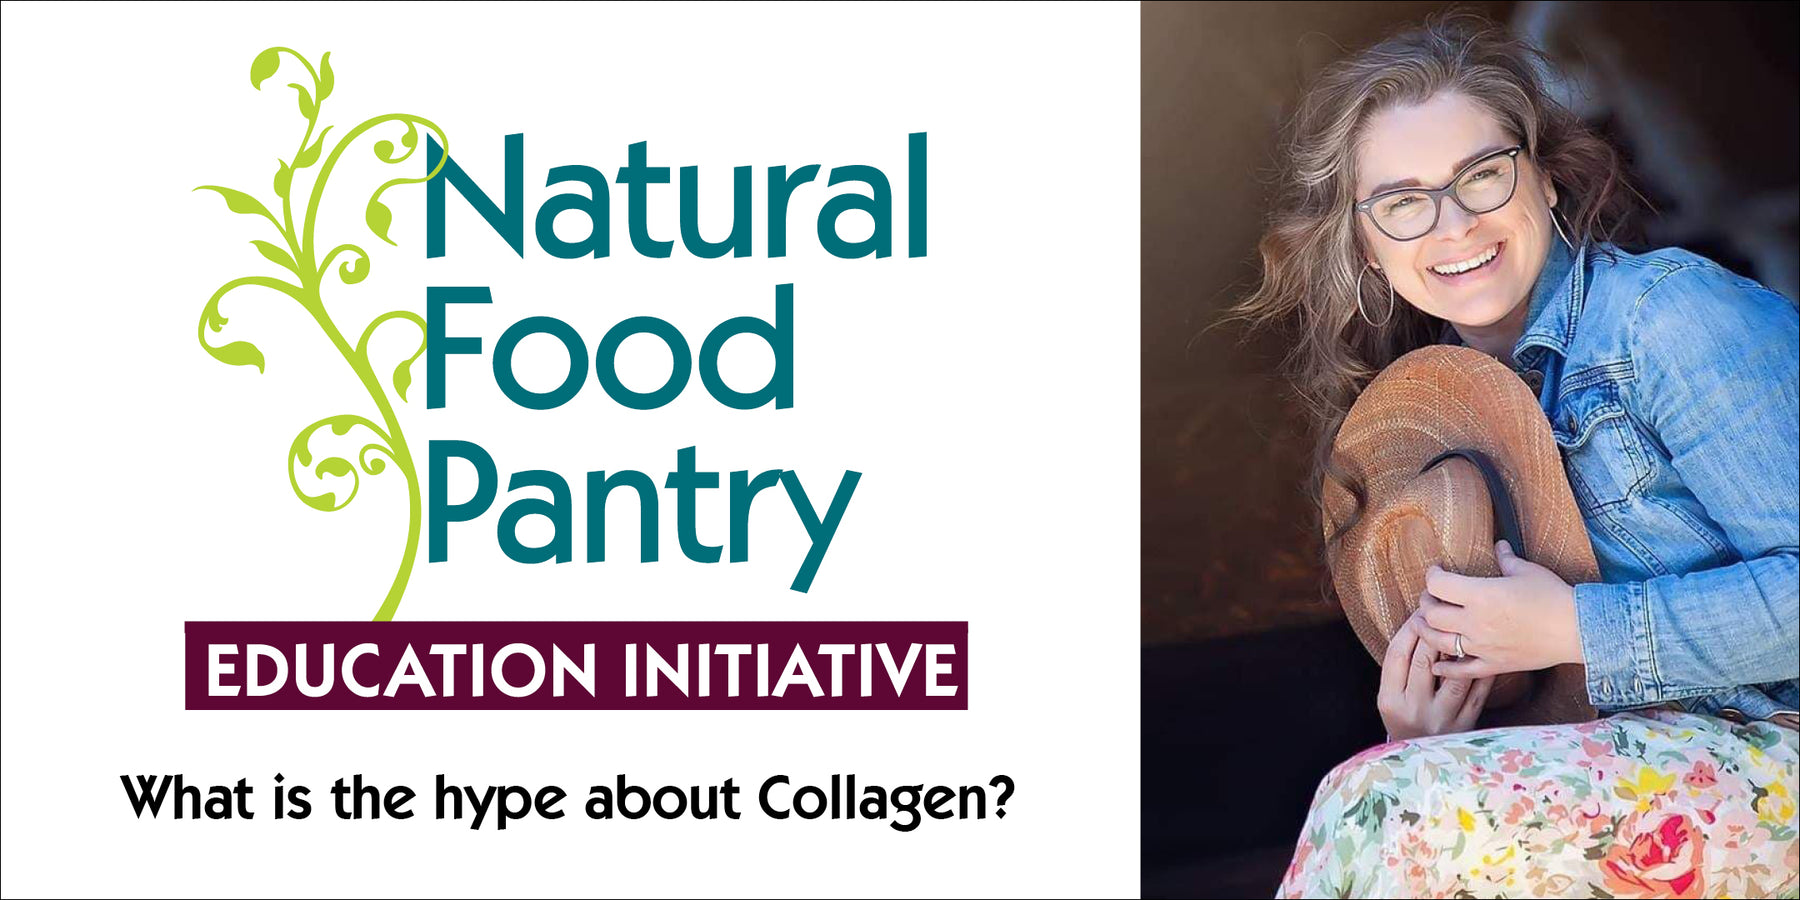 Jul 30: What is the hype about Collagen?